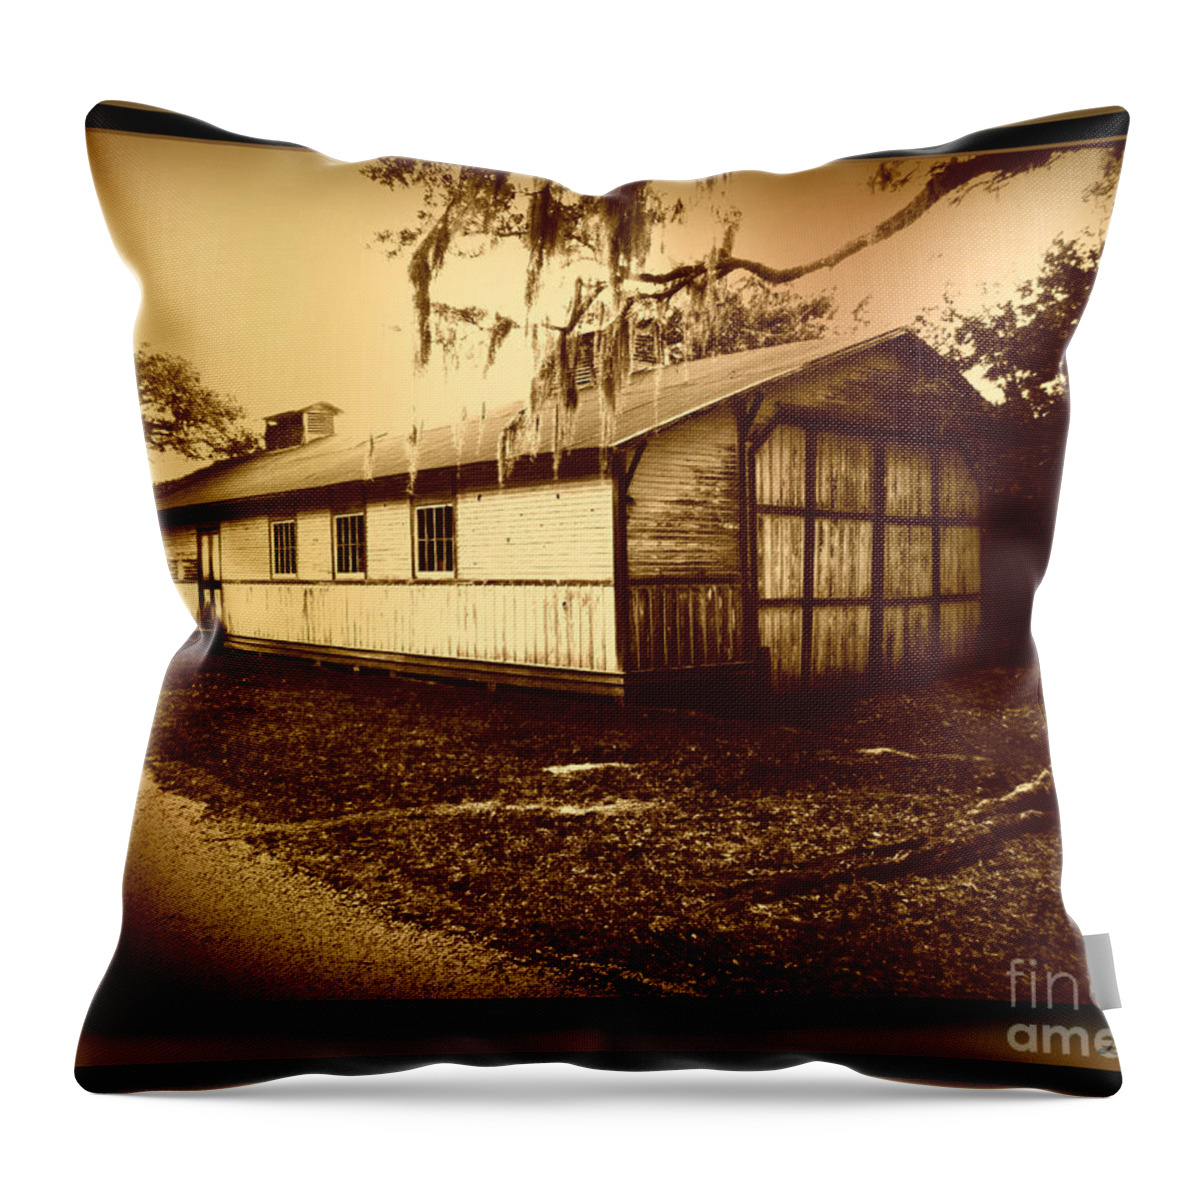 Sepia Throw Pillow featuring the photograph Boathouse - Avery Island by Leslie Revels